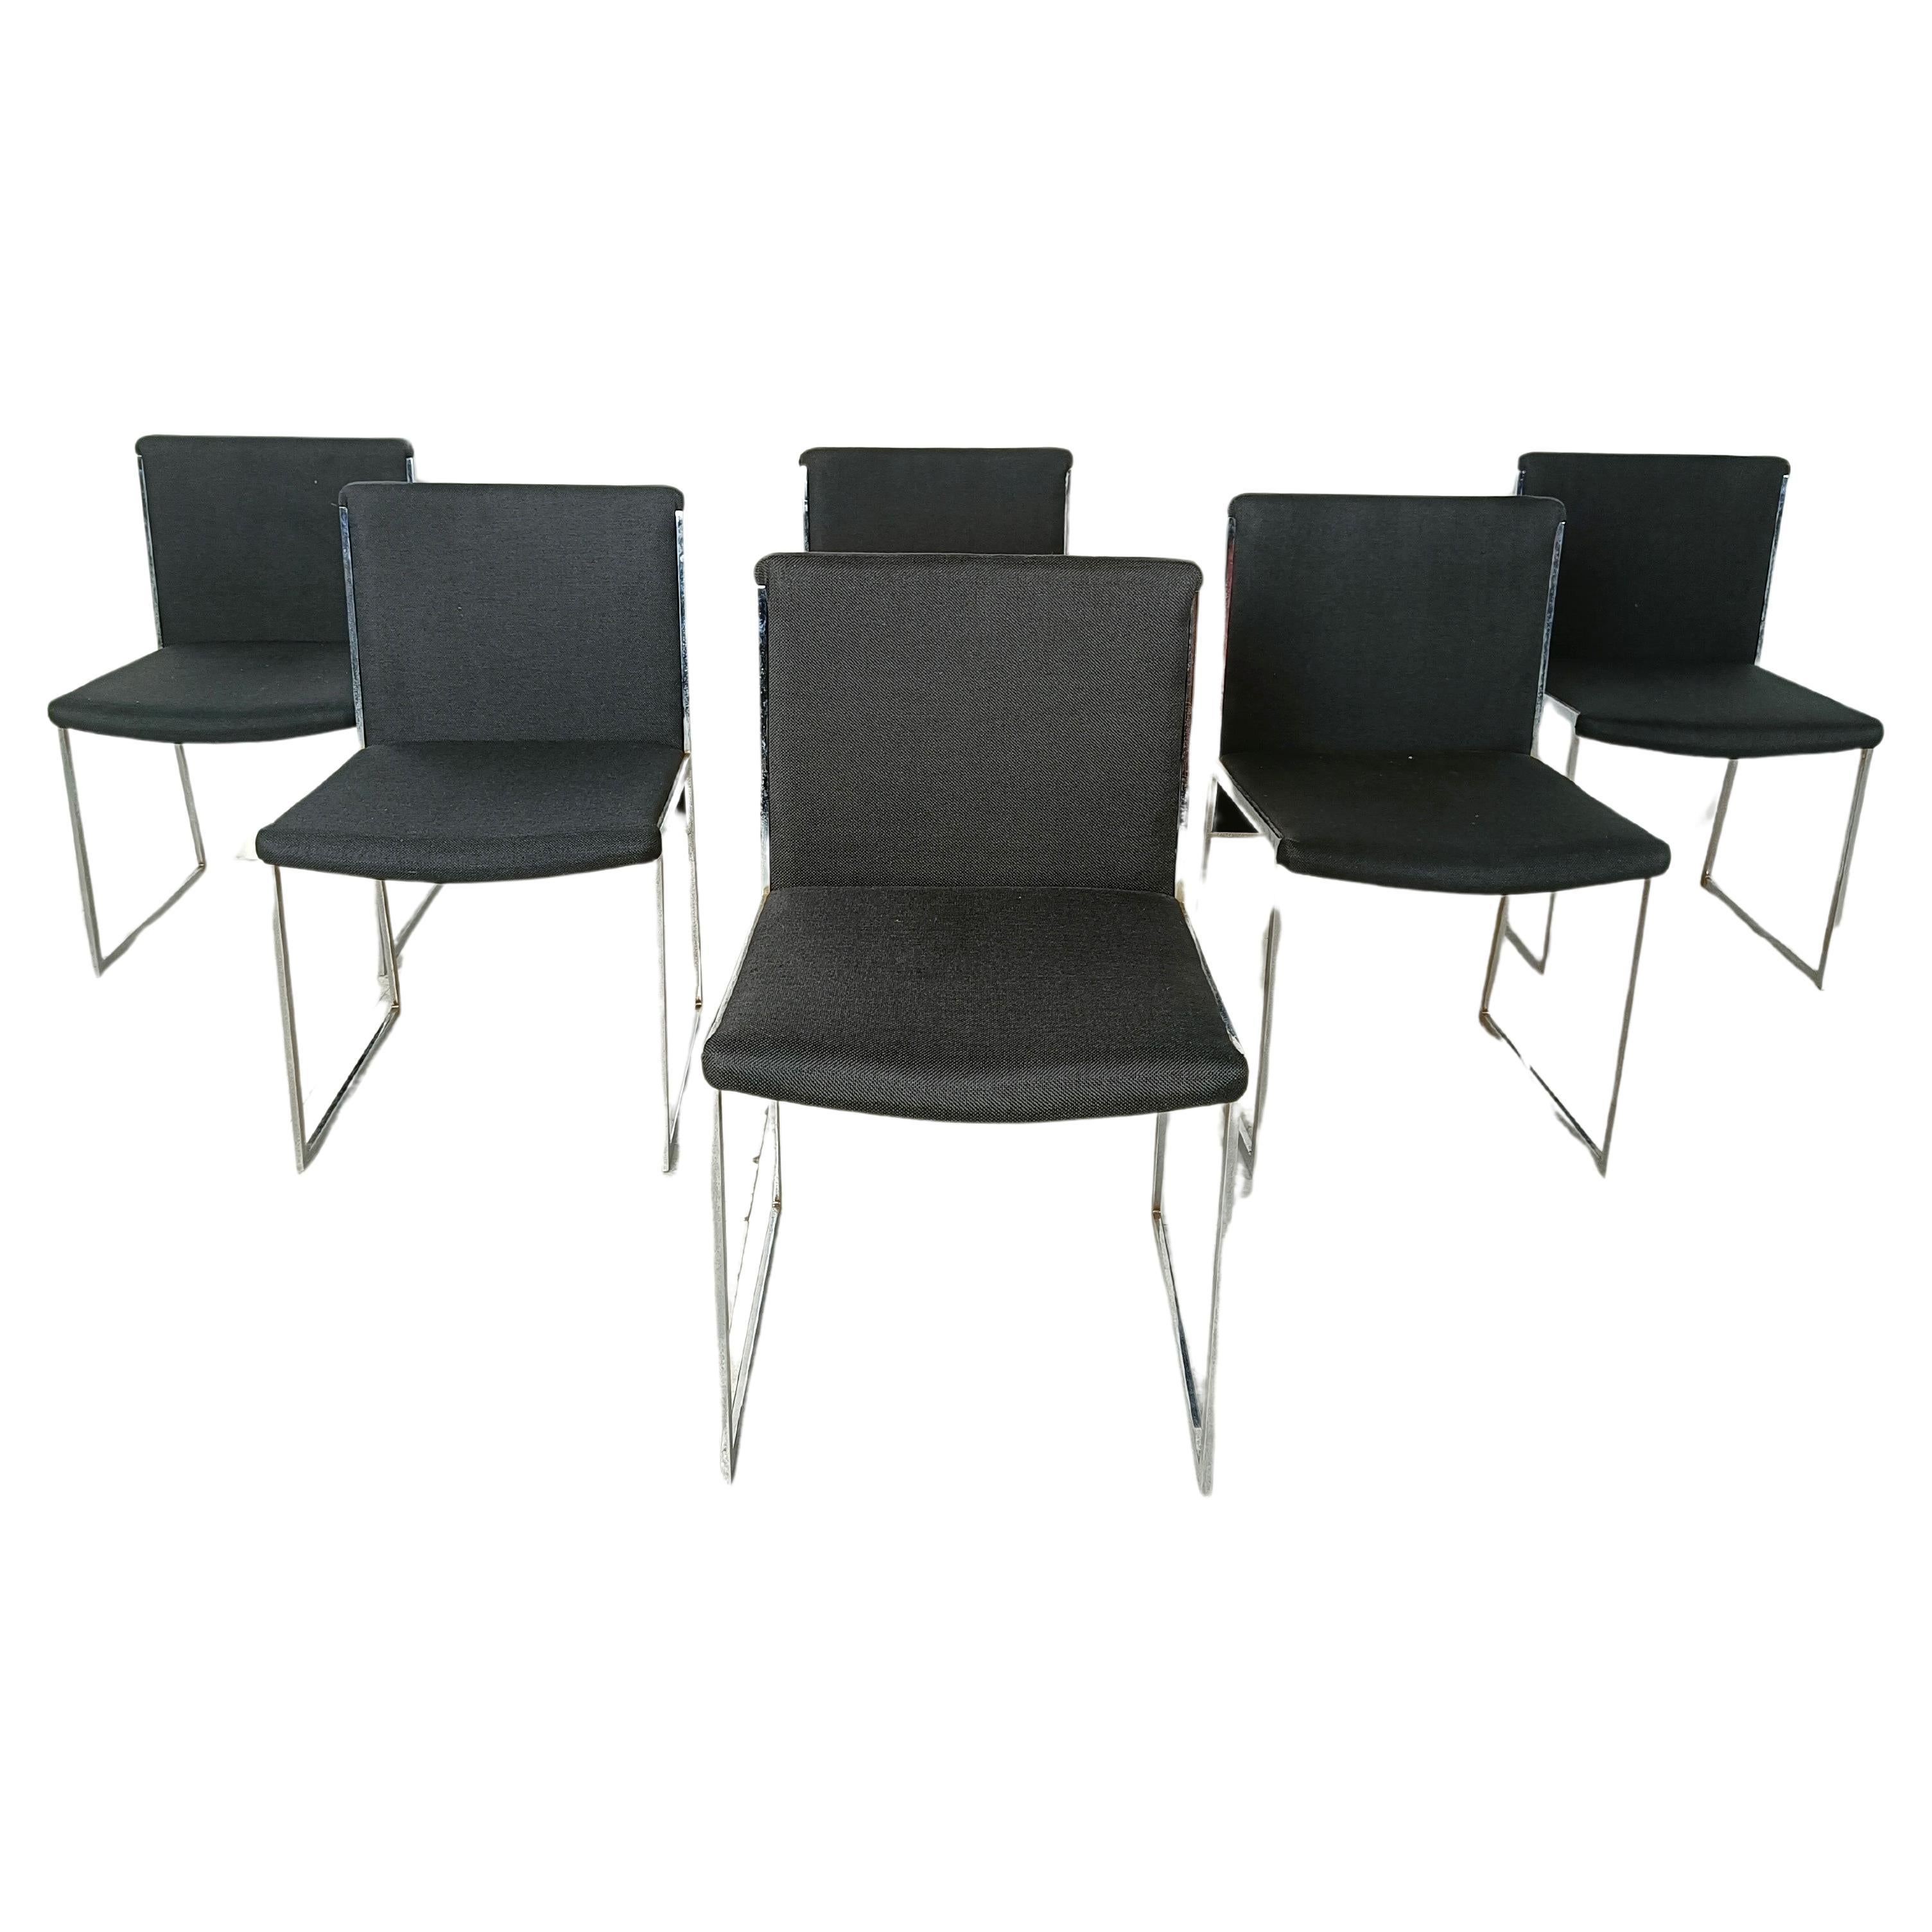 Vintage chrome italian dining chairs, 1970s